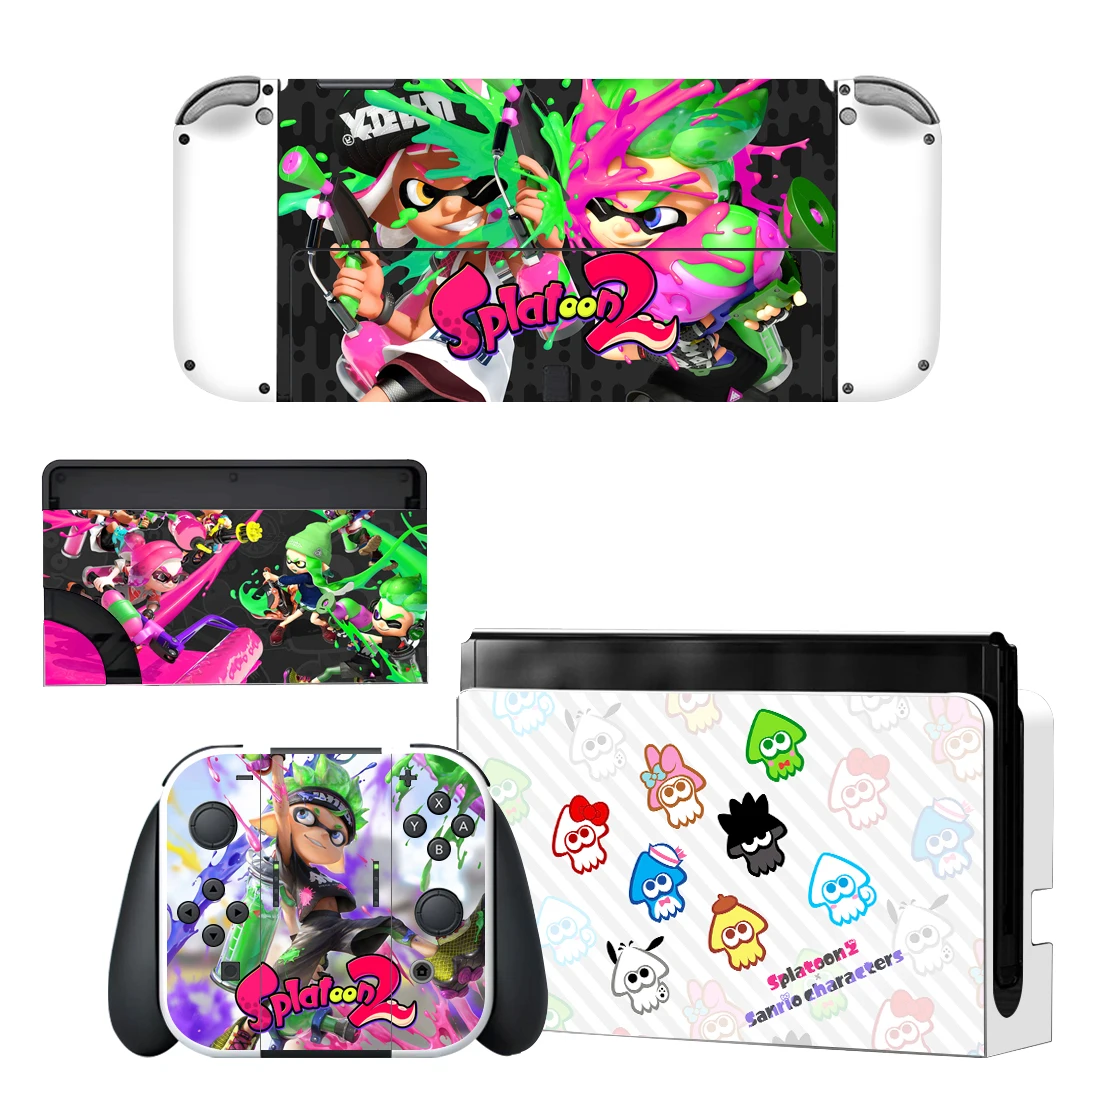 

Splatoon 2 Nintendoswitch Skin Cover Sticker Decal for Nintendo Switch OLED Console Joy-con Controller Dock Skin Vinyl